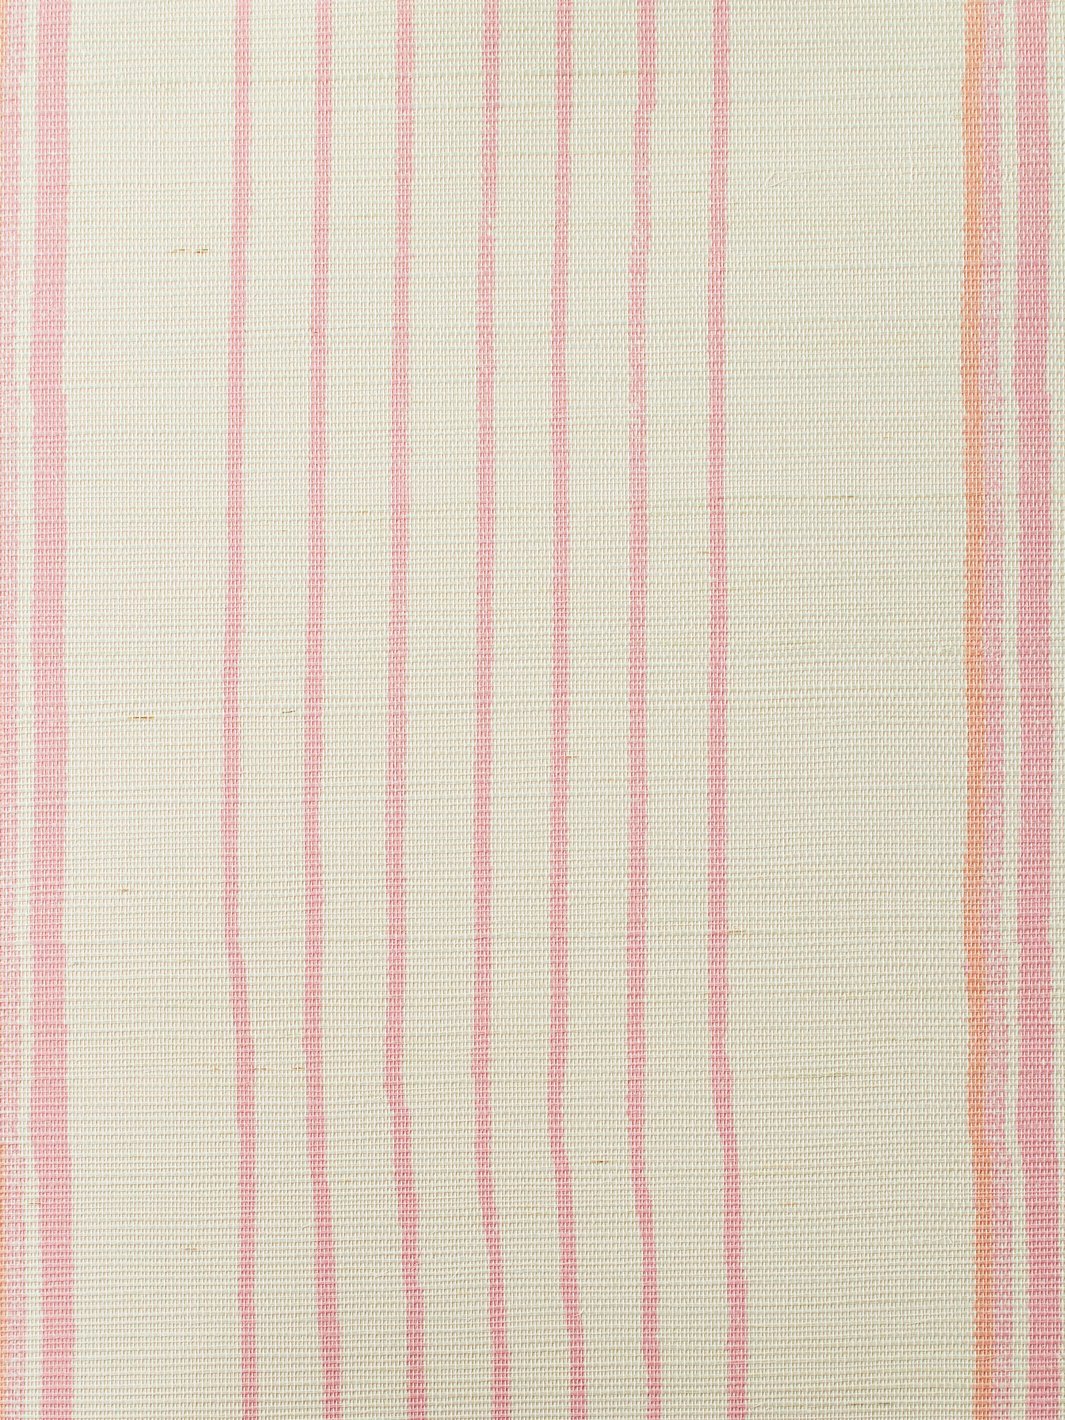 'Two Tone Stripe' Grasscloth' Wallpaper by Nathan Turner - Creamsicle